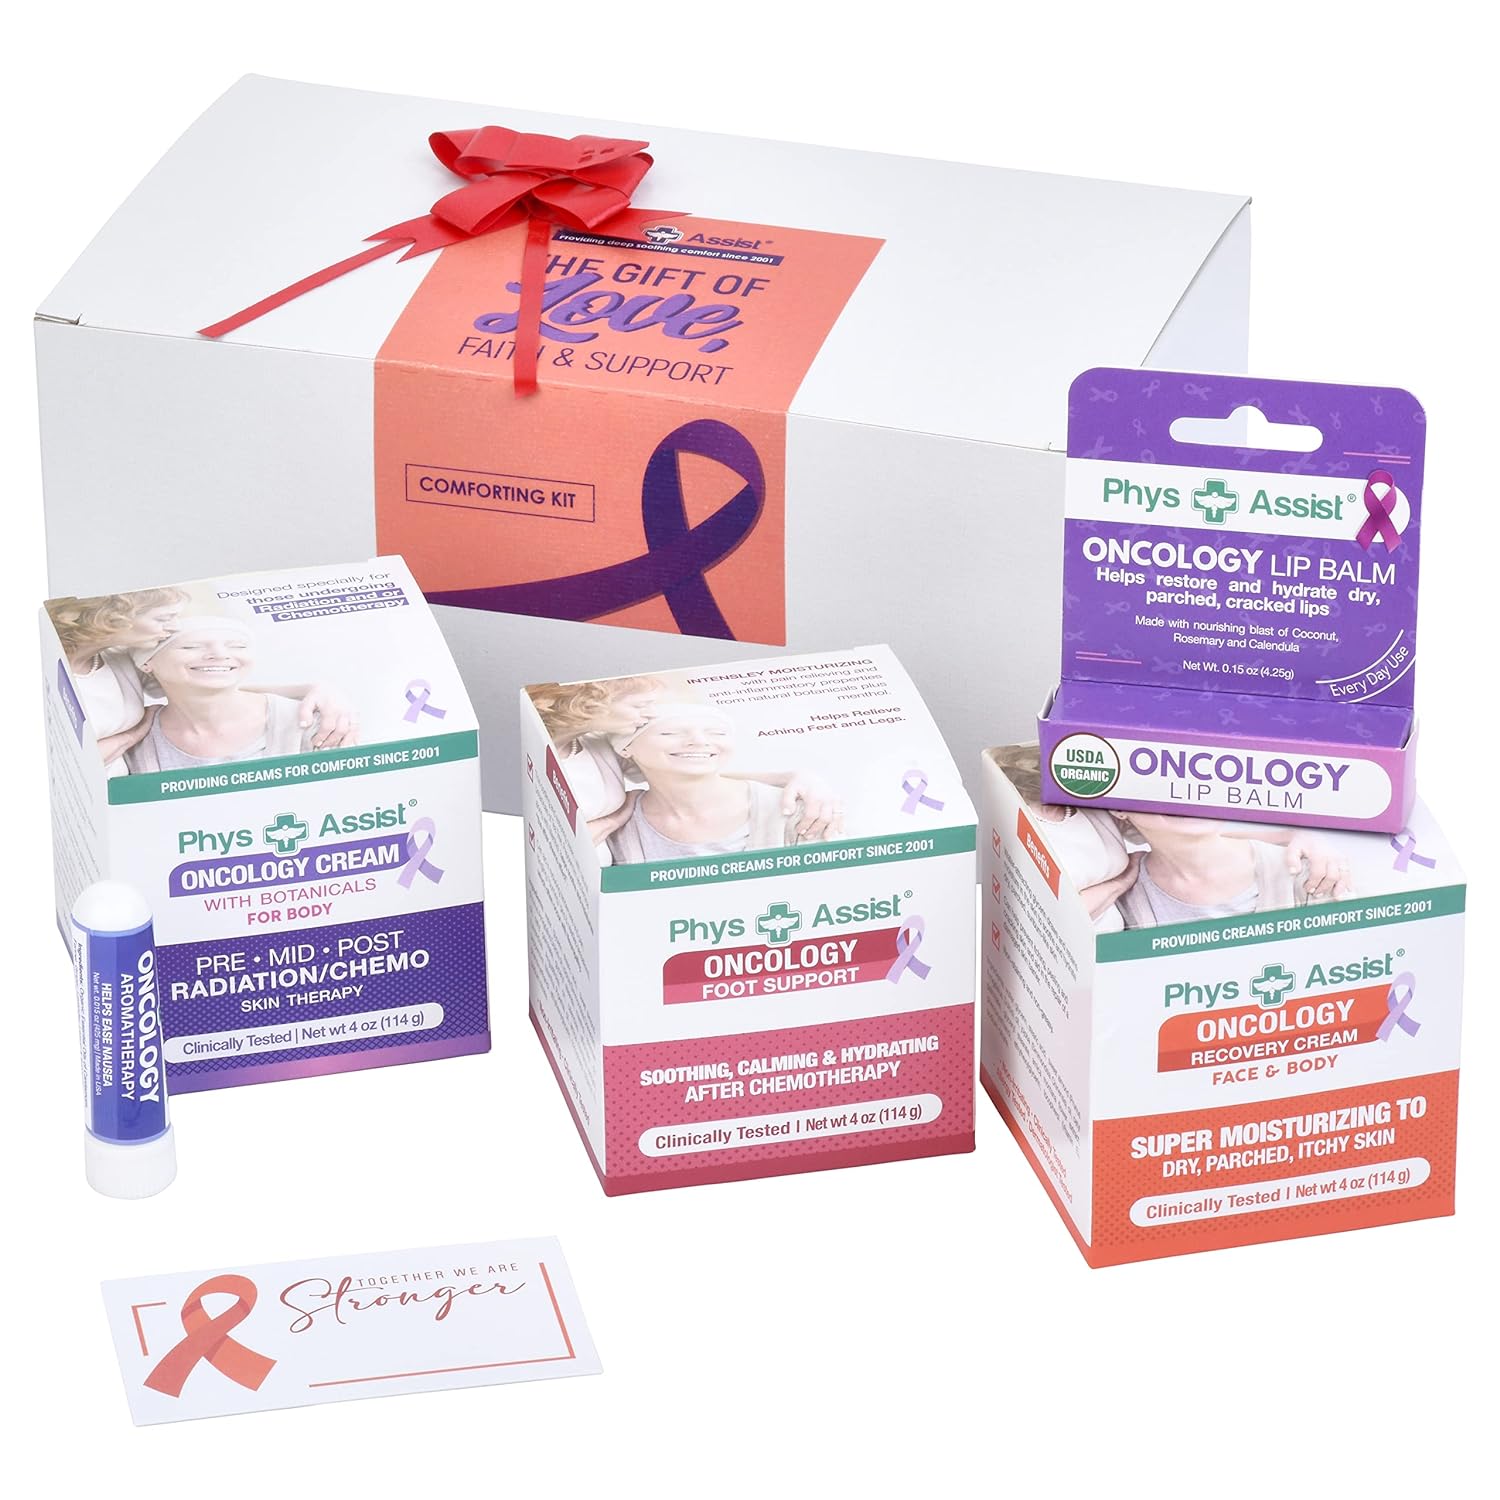 PhysAssist Bundle Oncology Kit For Women and Men - Comfort Kit For Chemo Patients. The Essentials for Face, Body & Feet. Includes Oncology Botanicals, Recovery and Foot Support. (3 - 4 oz) plus lip balm and aromaterahy nausea